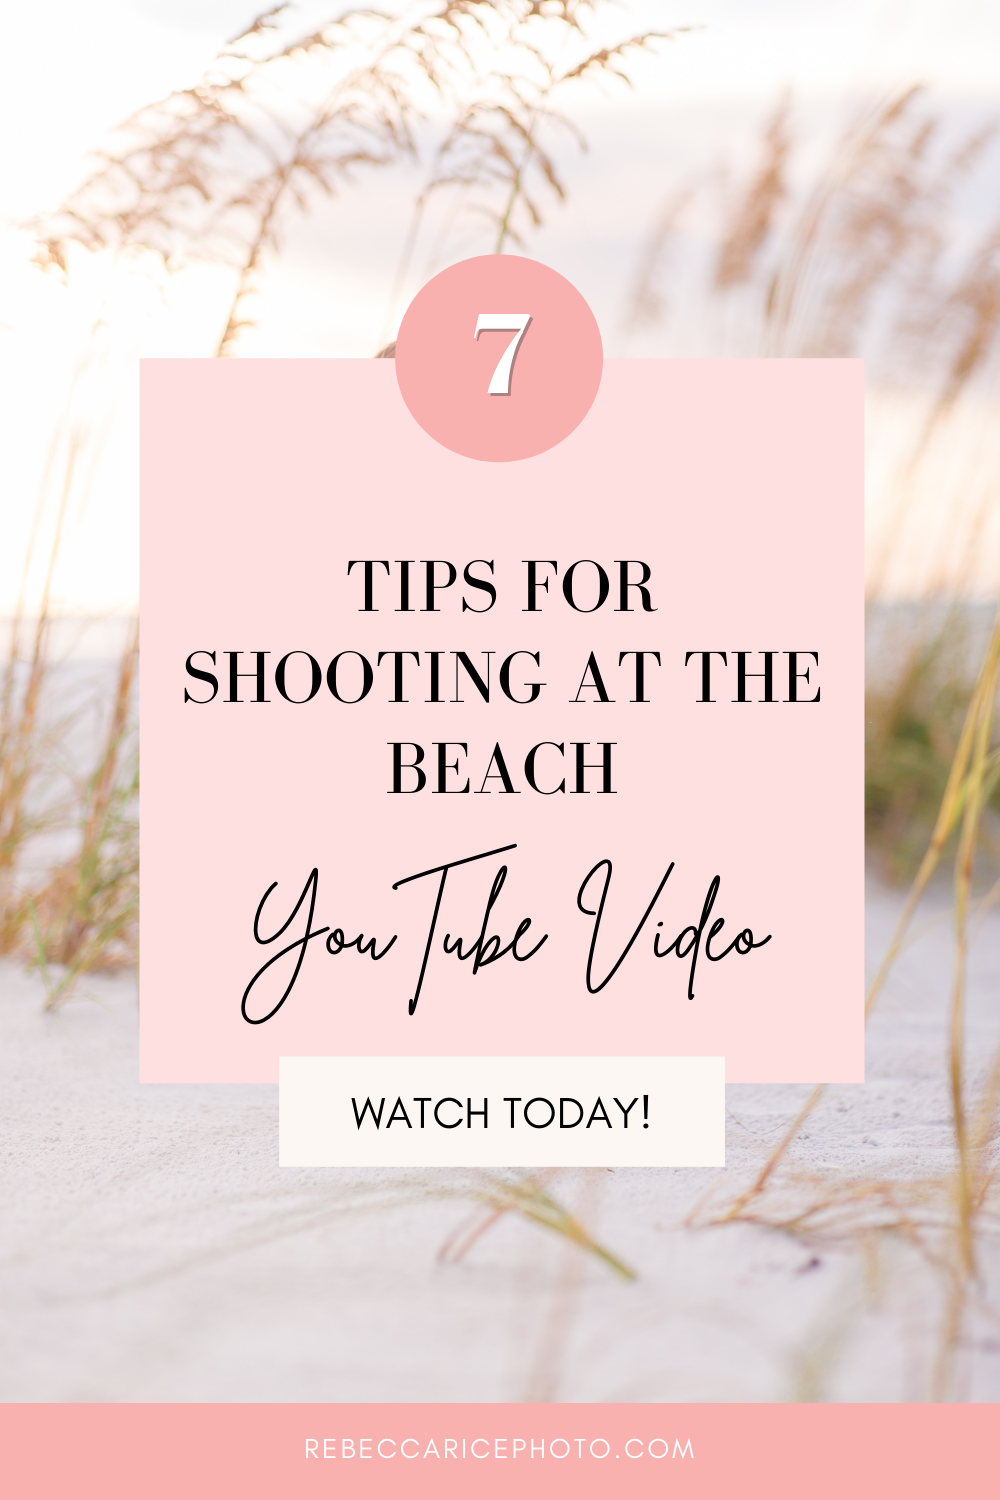 7 Tips for Shooting at the Beach